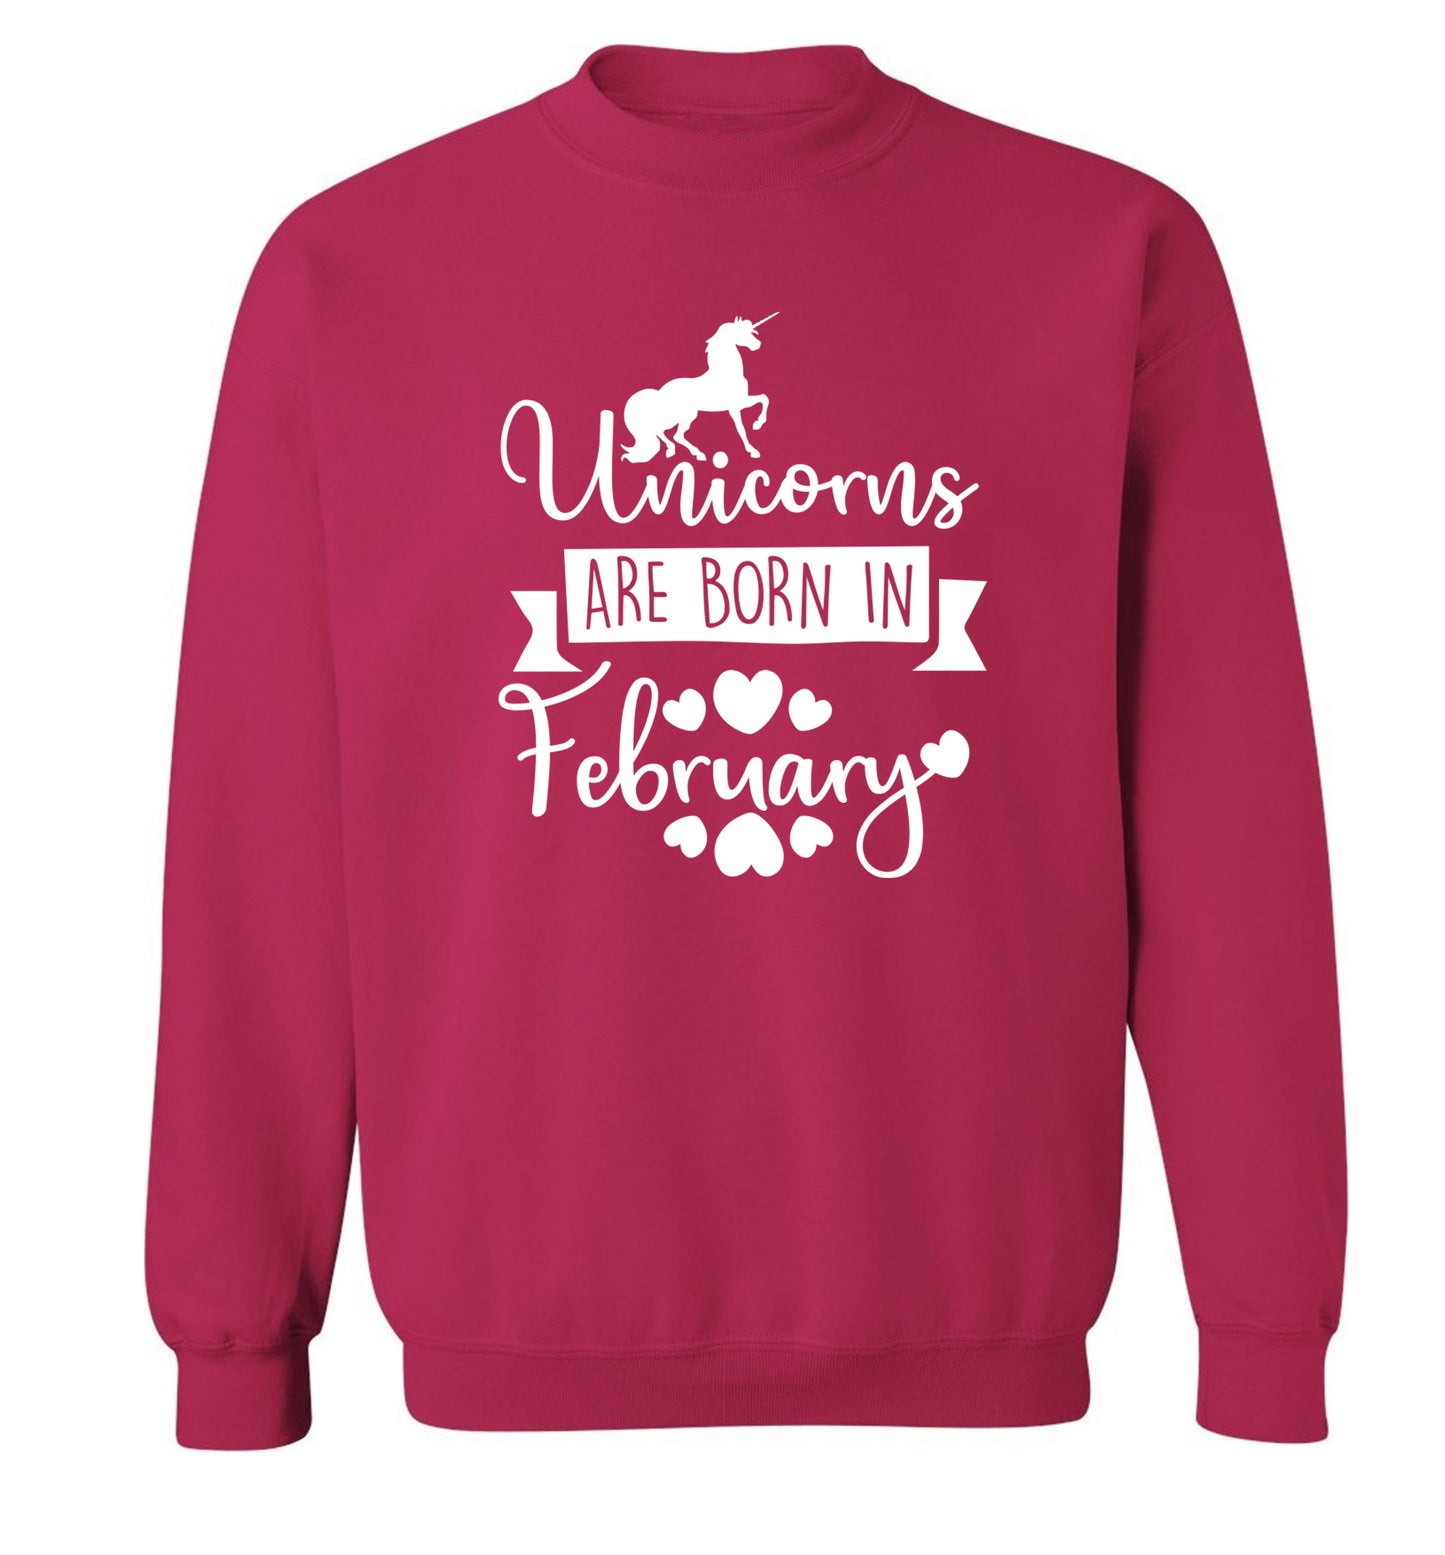 Unicorns are born in February Adult's unisex pink Sweater 2XL